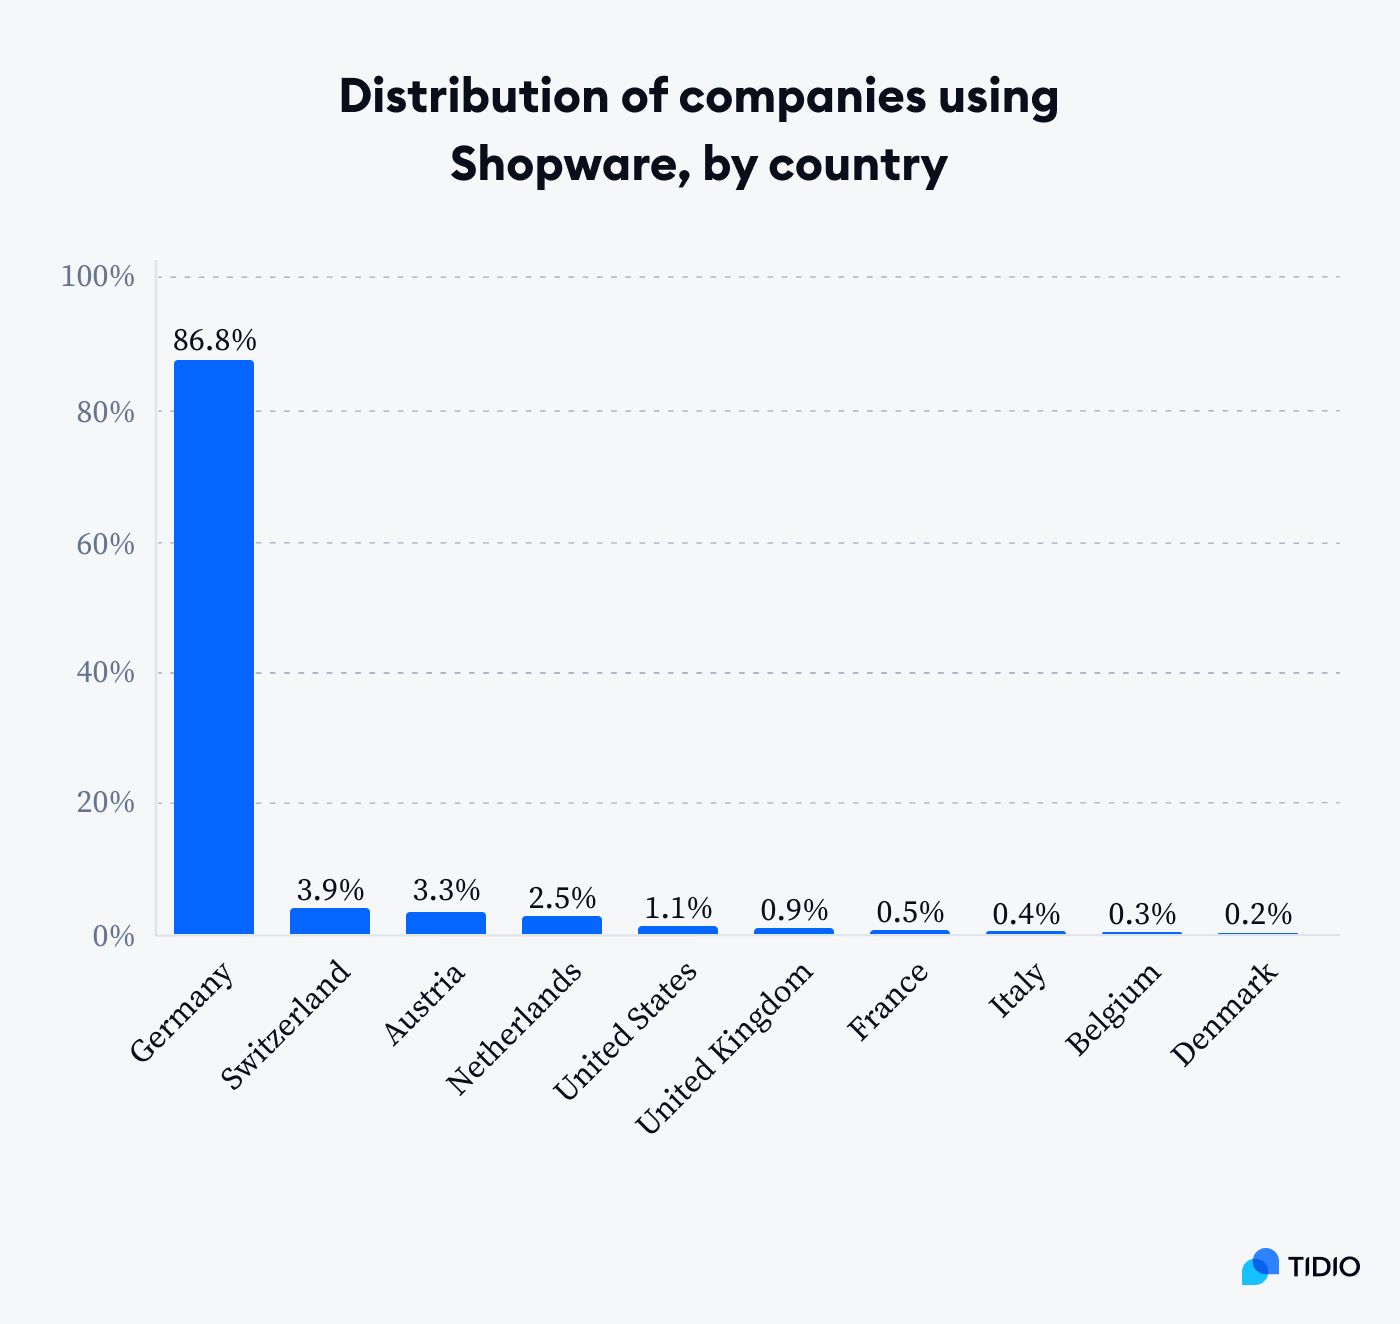 Shopware usage statistics by country